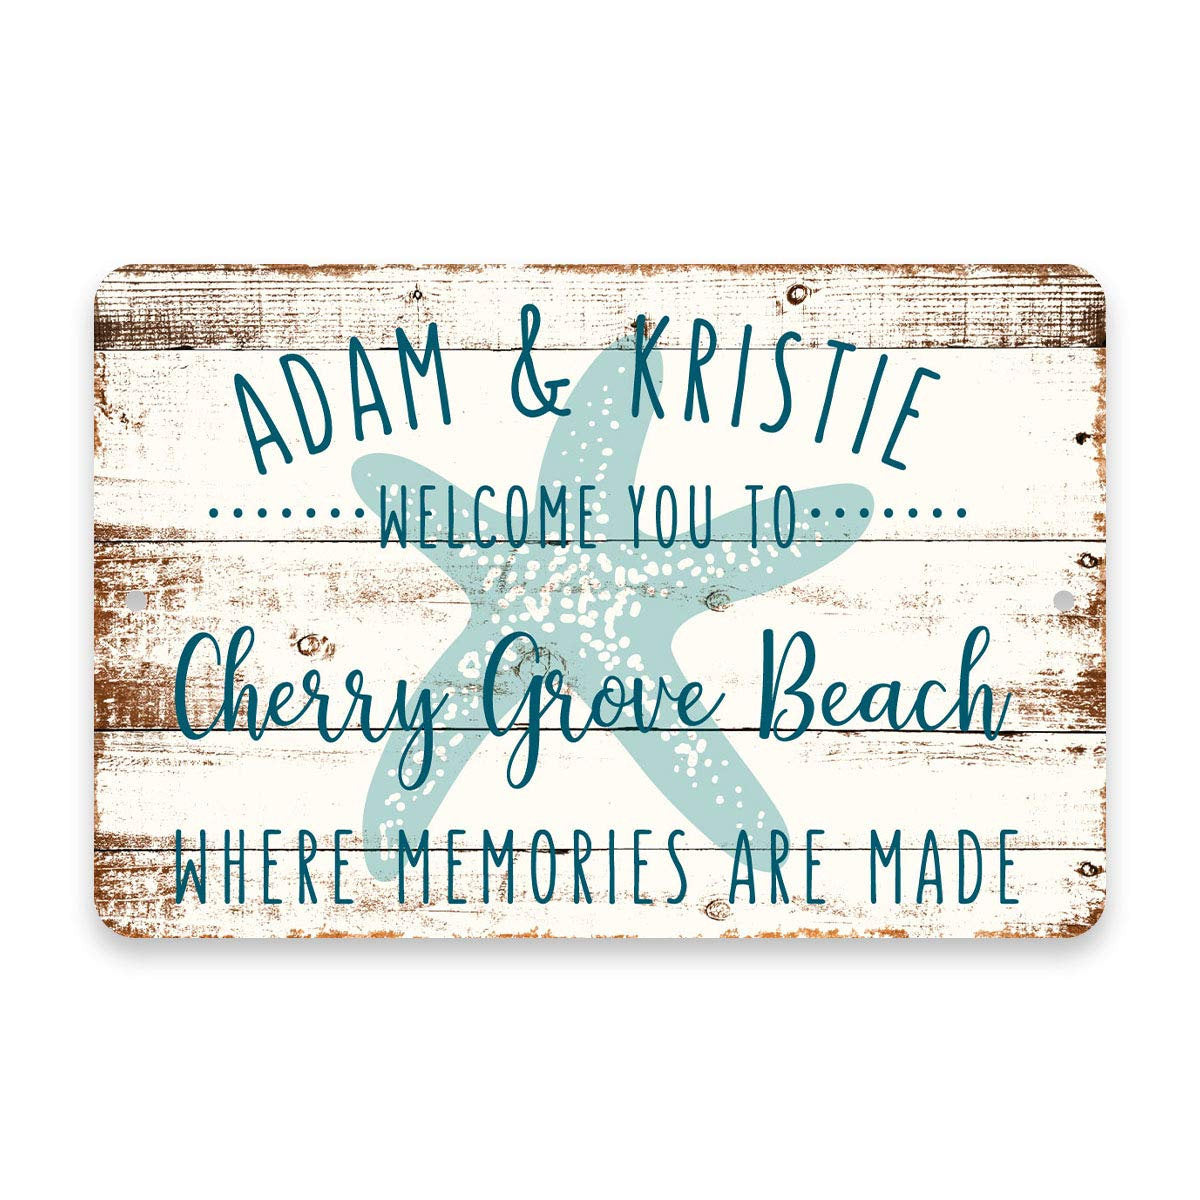 Personalized Welcome to Cherry Grove Beach Where Memories are Made Sign - 8 X 12 Metal Sign with Wood Look